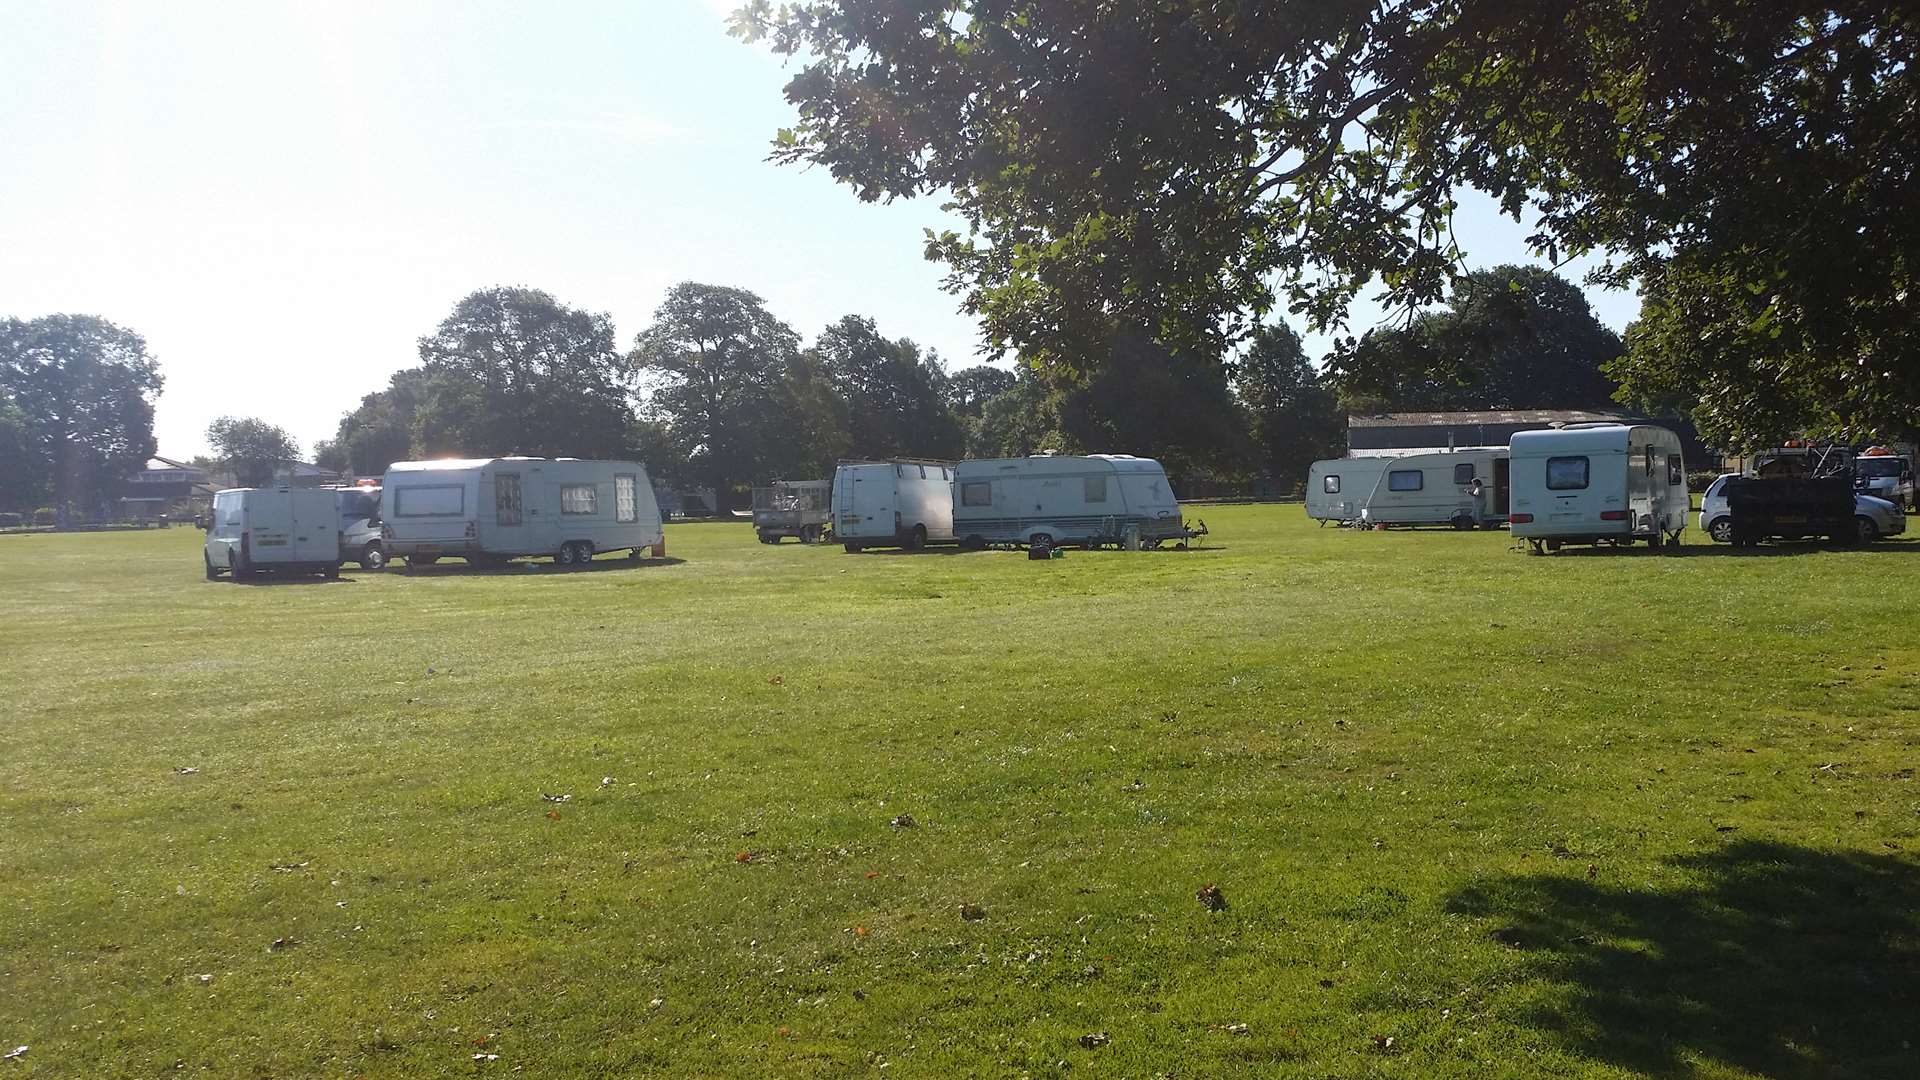 Travellers had arrived at the recreation ground in Park Wood this weekend.